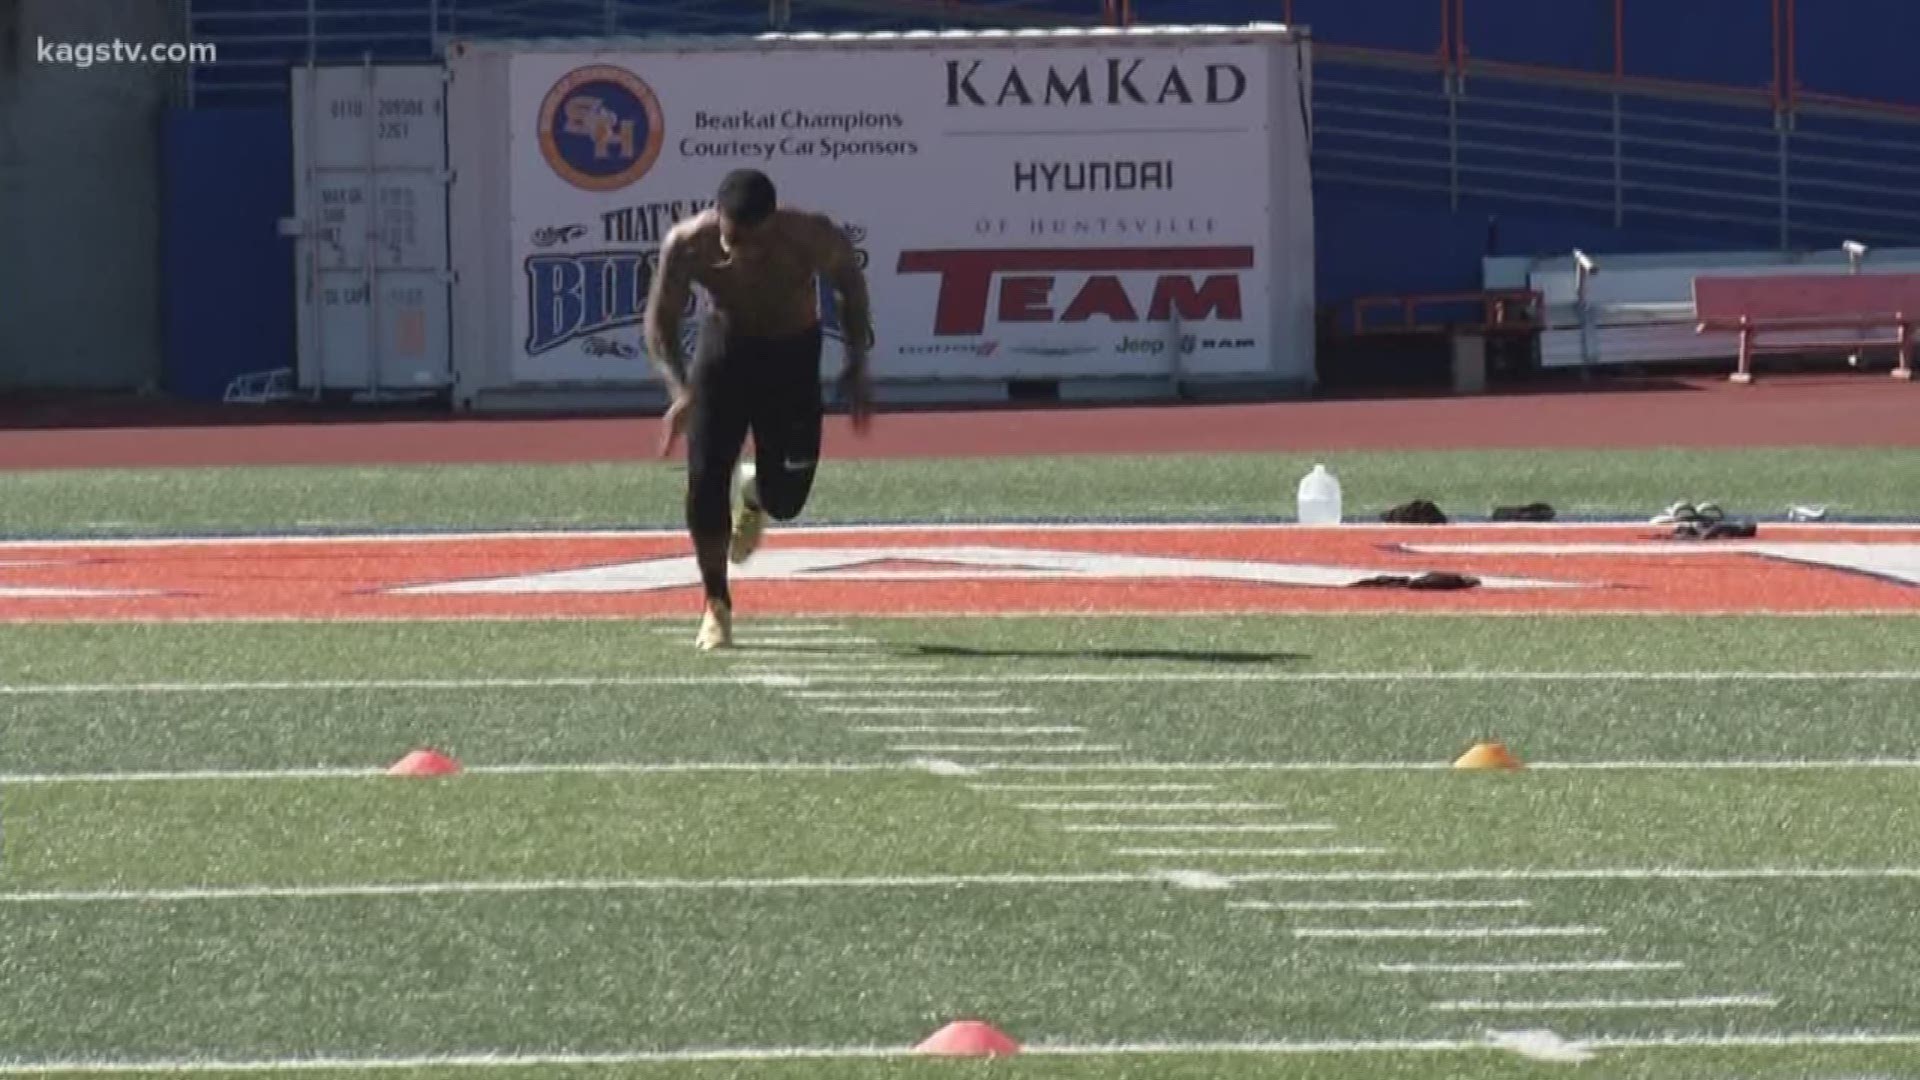 Defensive lineman Derick Roberson and wide receiver Davion Davis were out to prove to NFL scouts and personnel they have what it takes to play at the next level during Sam Houston State's Pro Day.